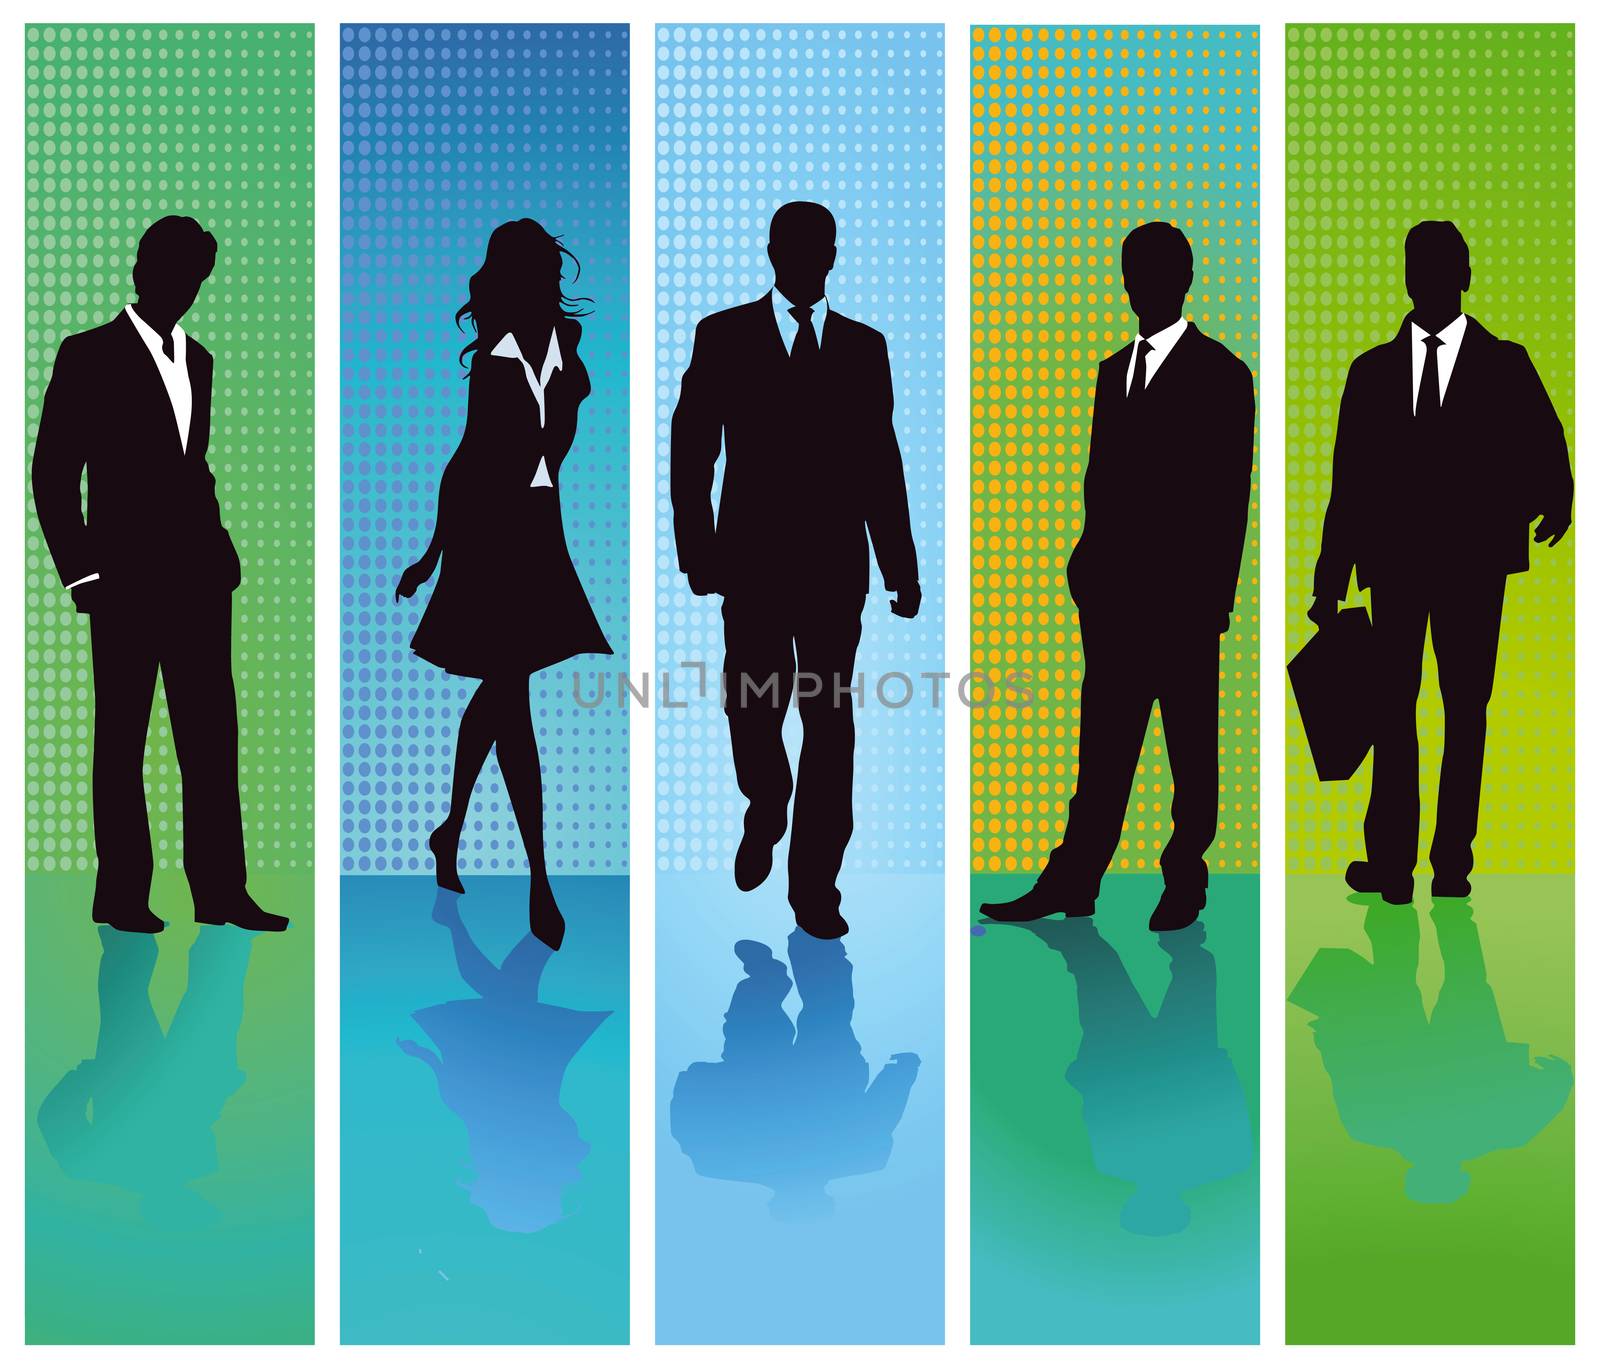 Business people groups set, illustration by scusi